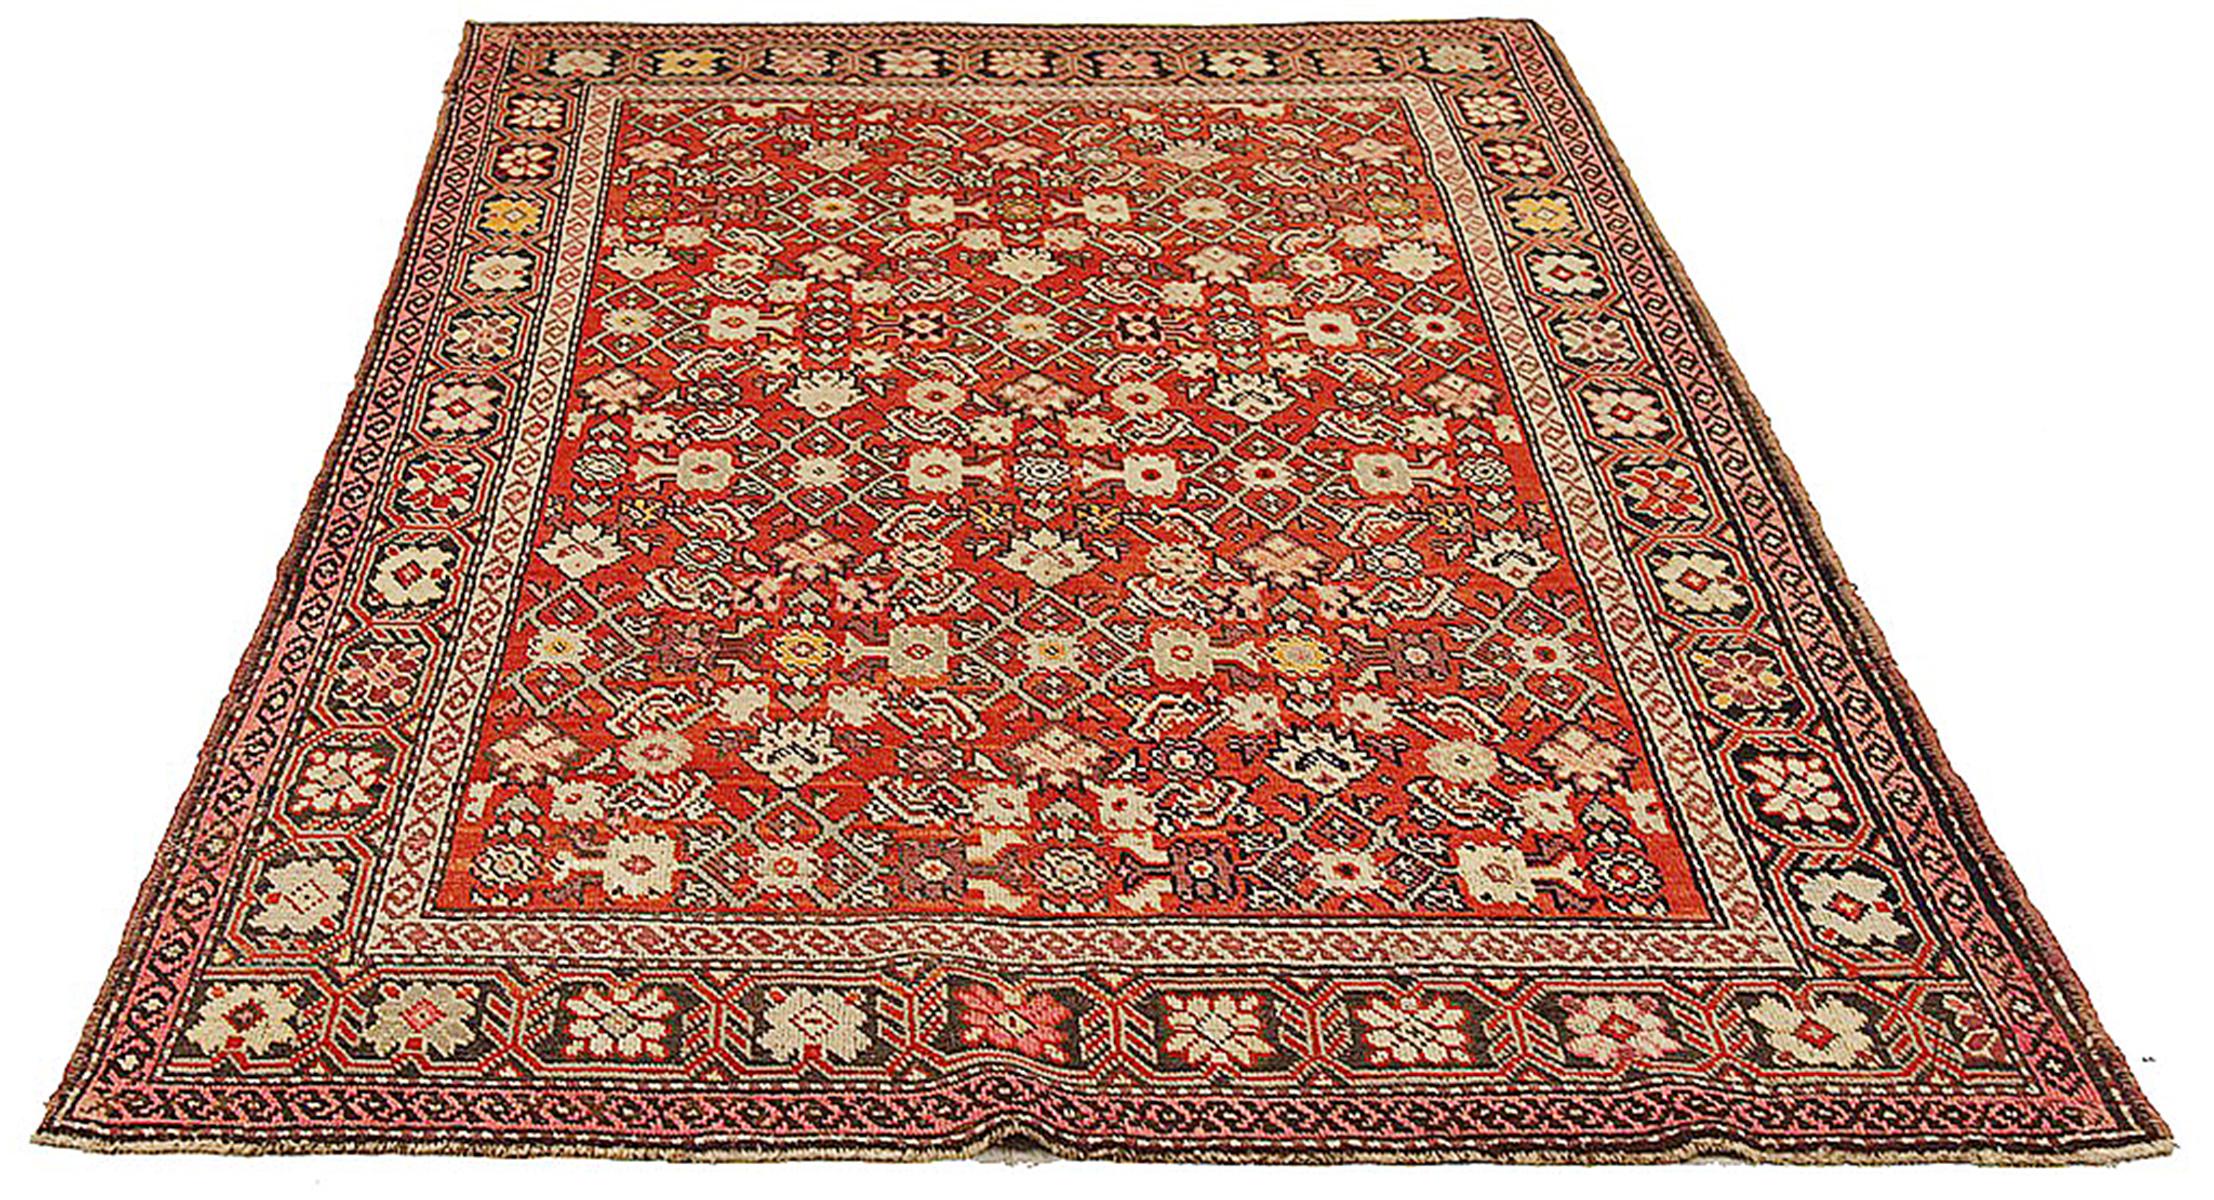 Antique Persian rug handwoven from the finest sheep’s wool and colored with all-natural vegetable dyes that are safe for humans and pets. It’s a traditional Karajeh design featuring floral medallions in ivory and black over a red center field. It’s